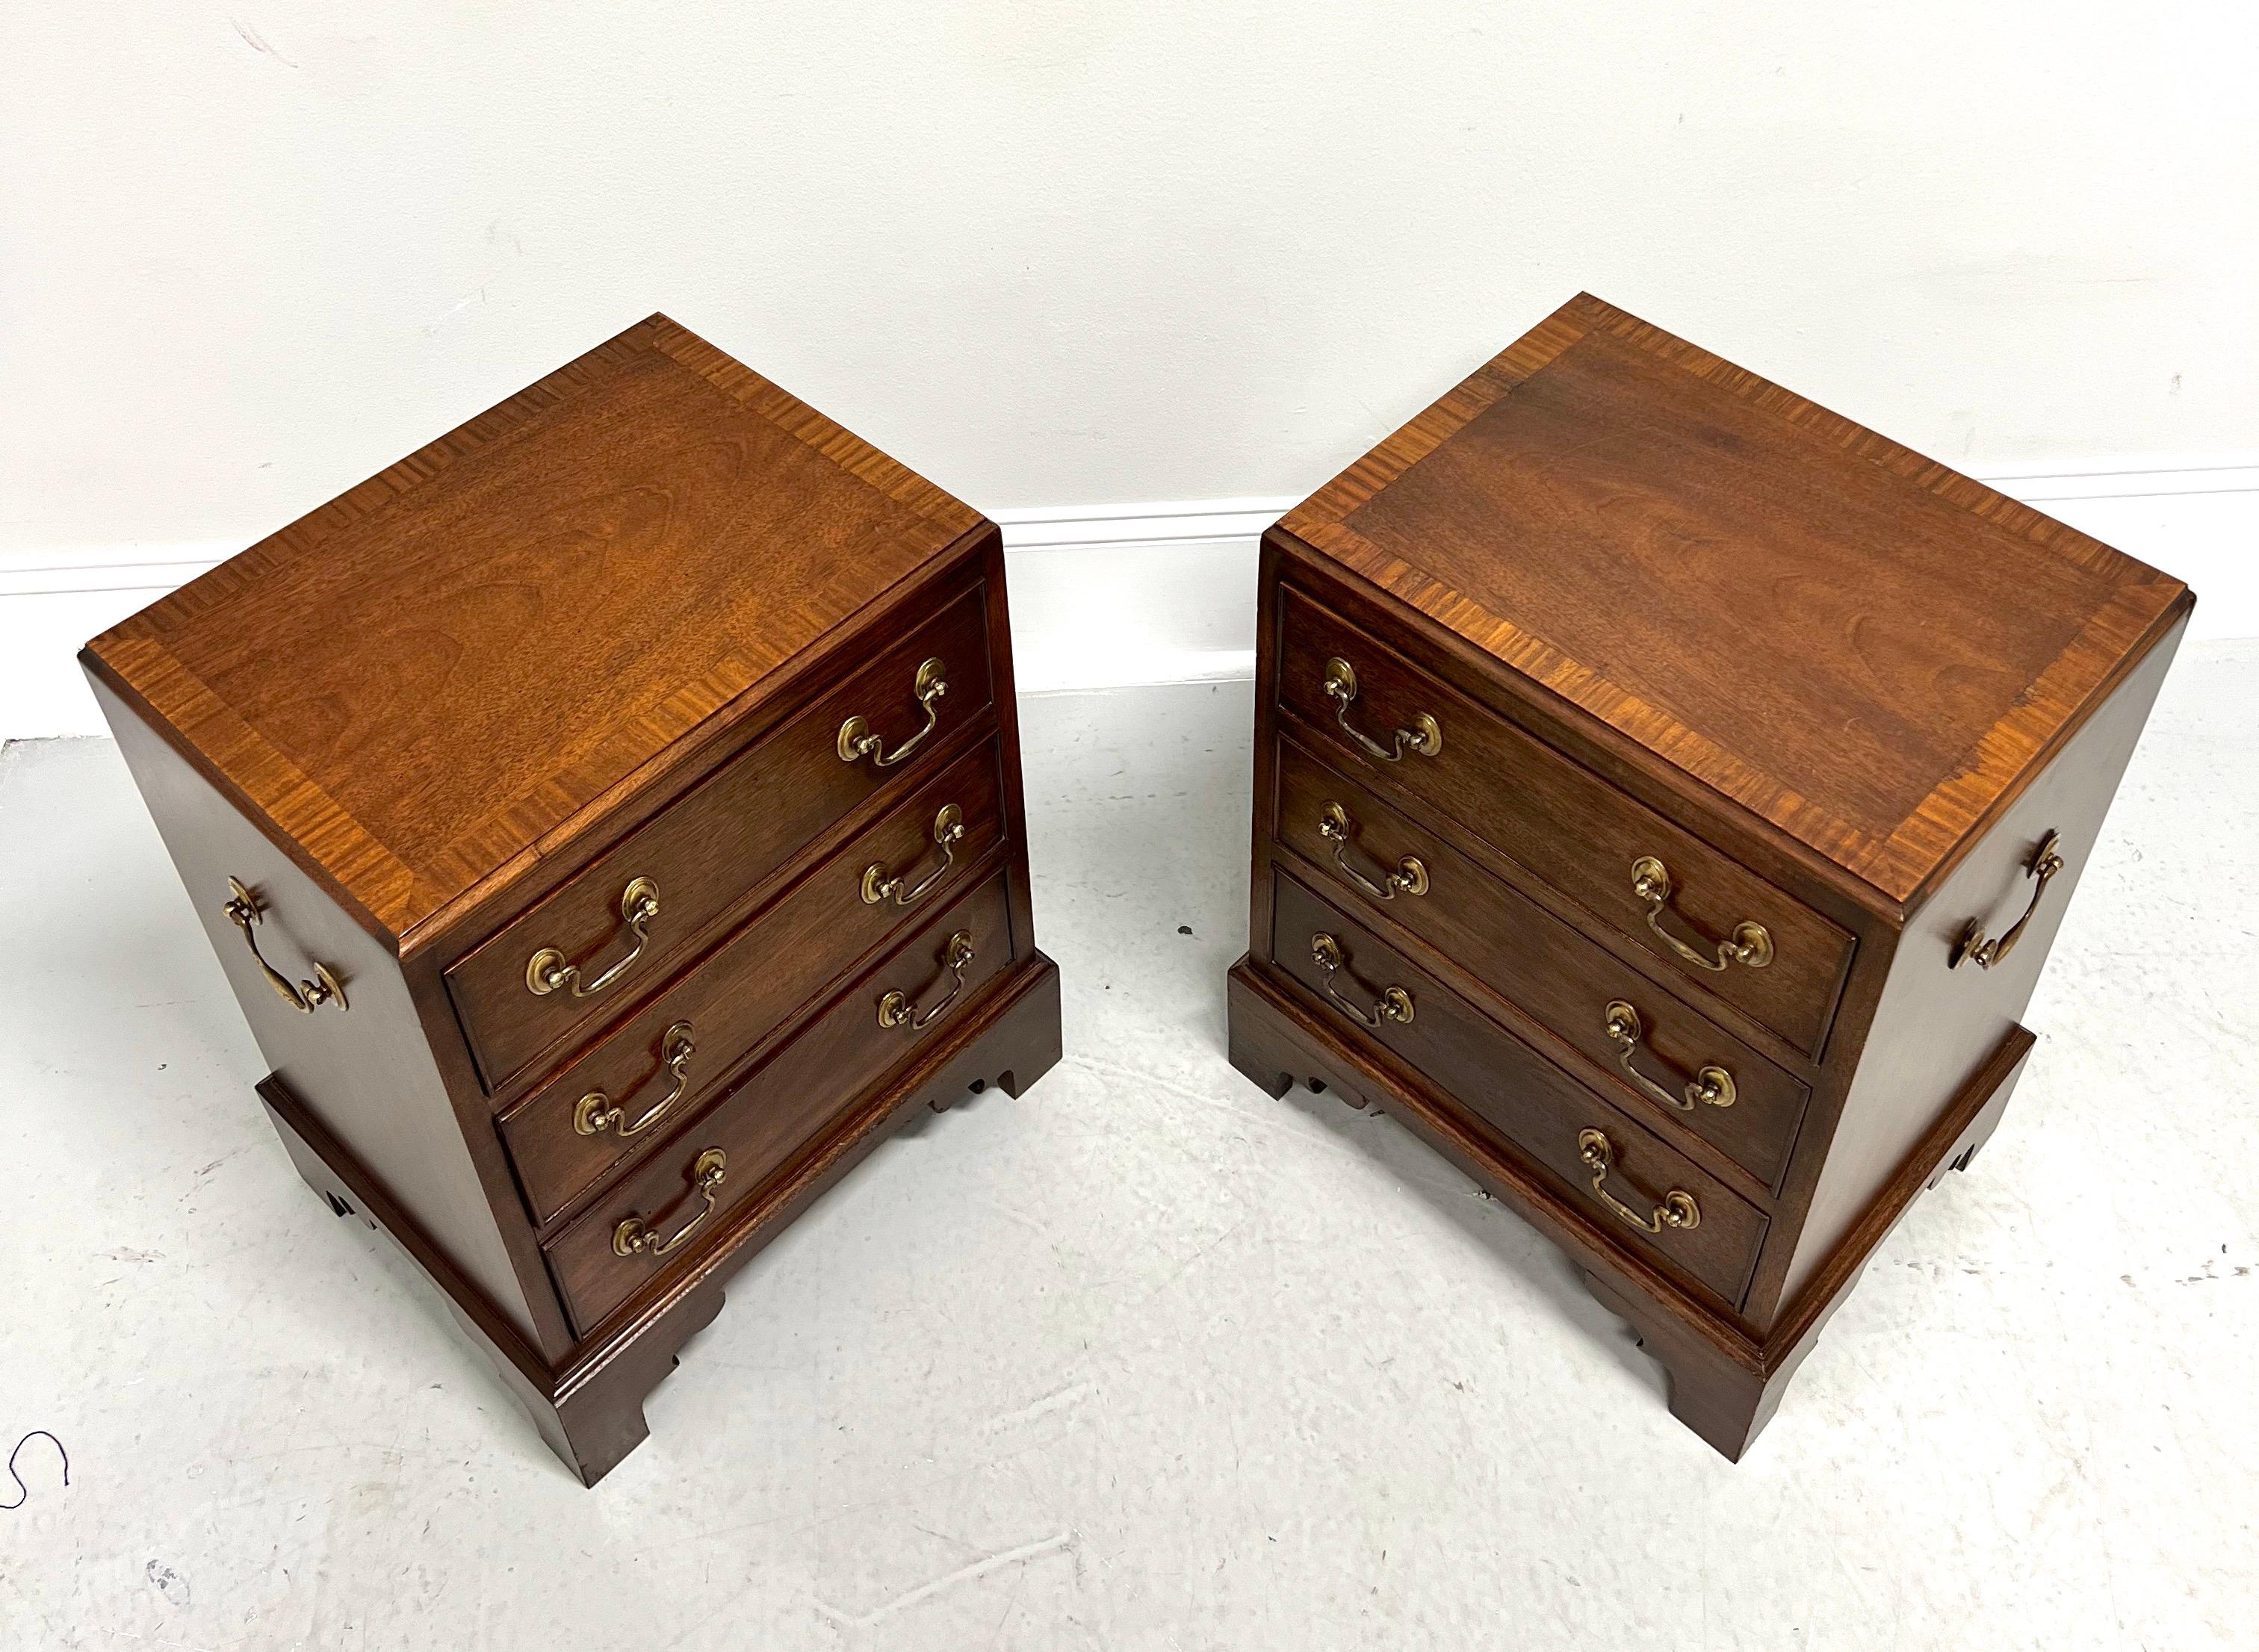 A pair of diminutive Chippendale style bedside or chairside chests, unbranded. Mahogany with brass drawer hardware & side handles, inlaid banded top with beveled edge, fully finished on all sides, and bracket feet. Features three drawers of dovetail